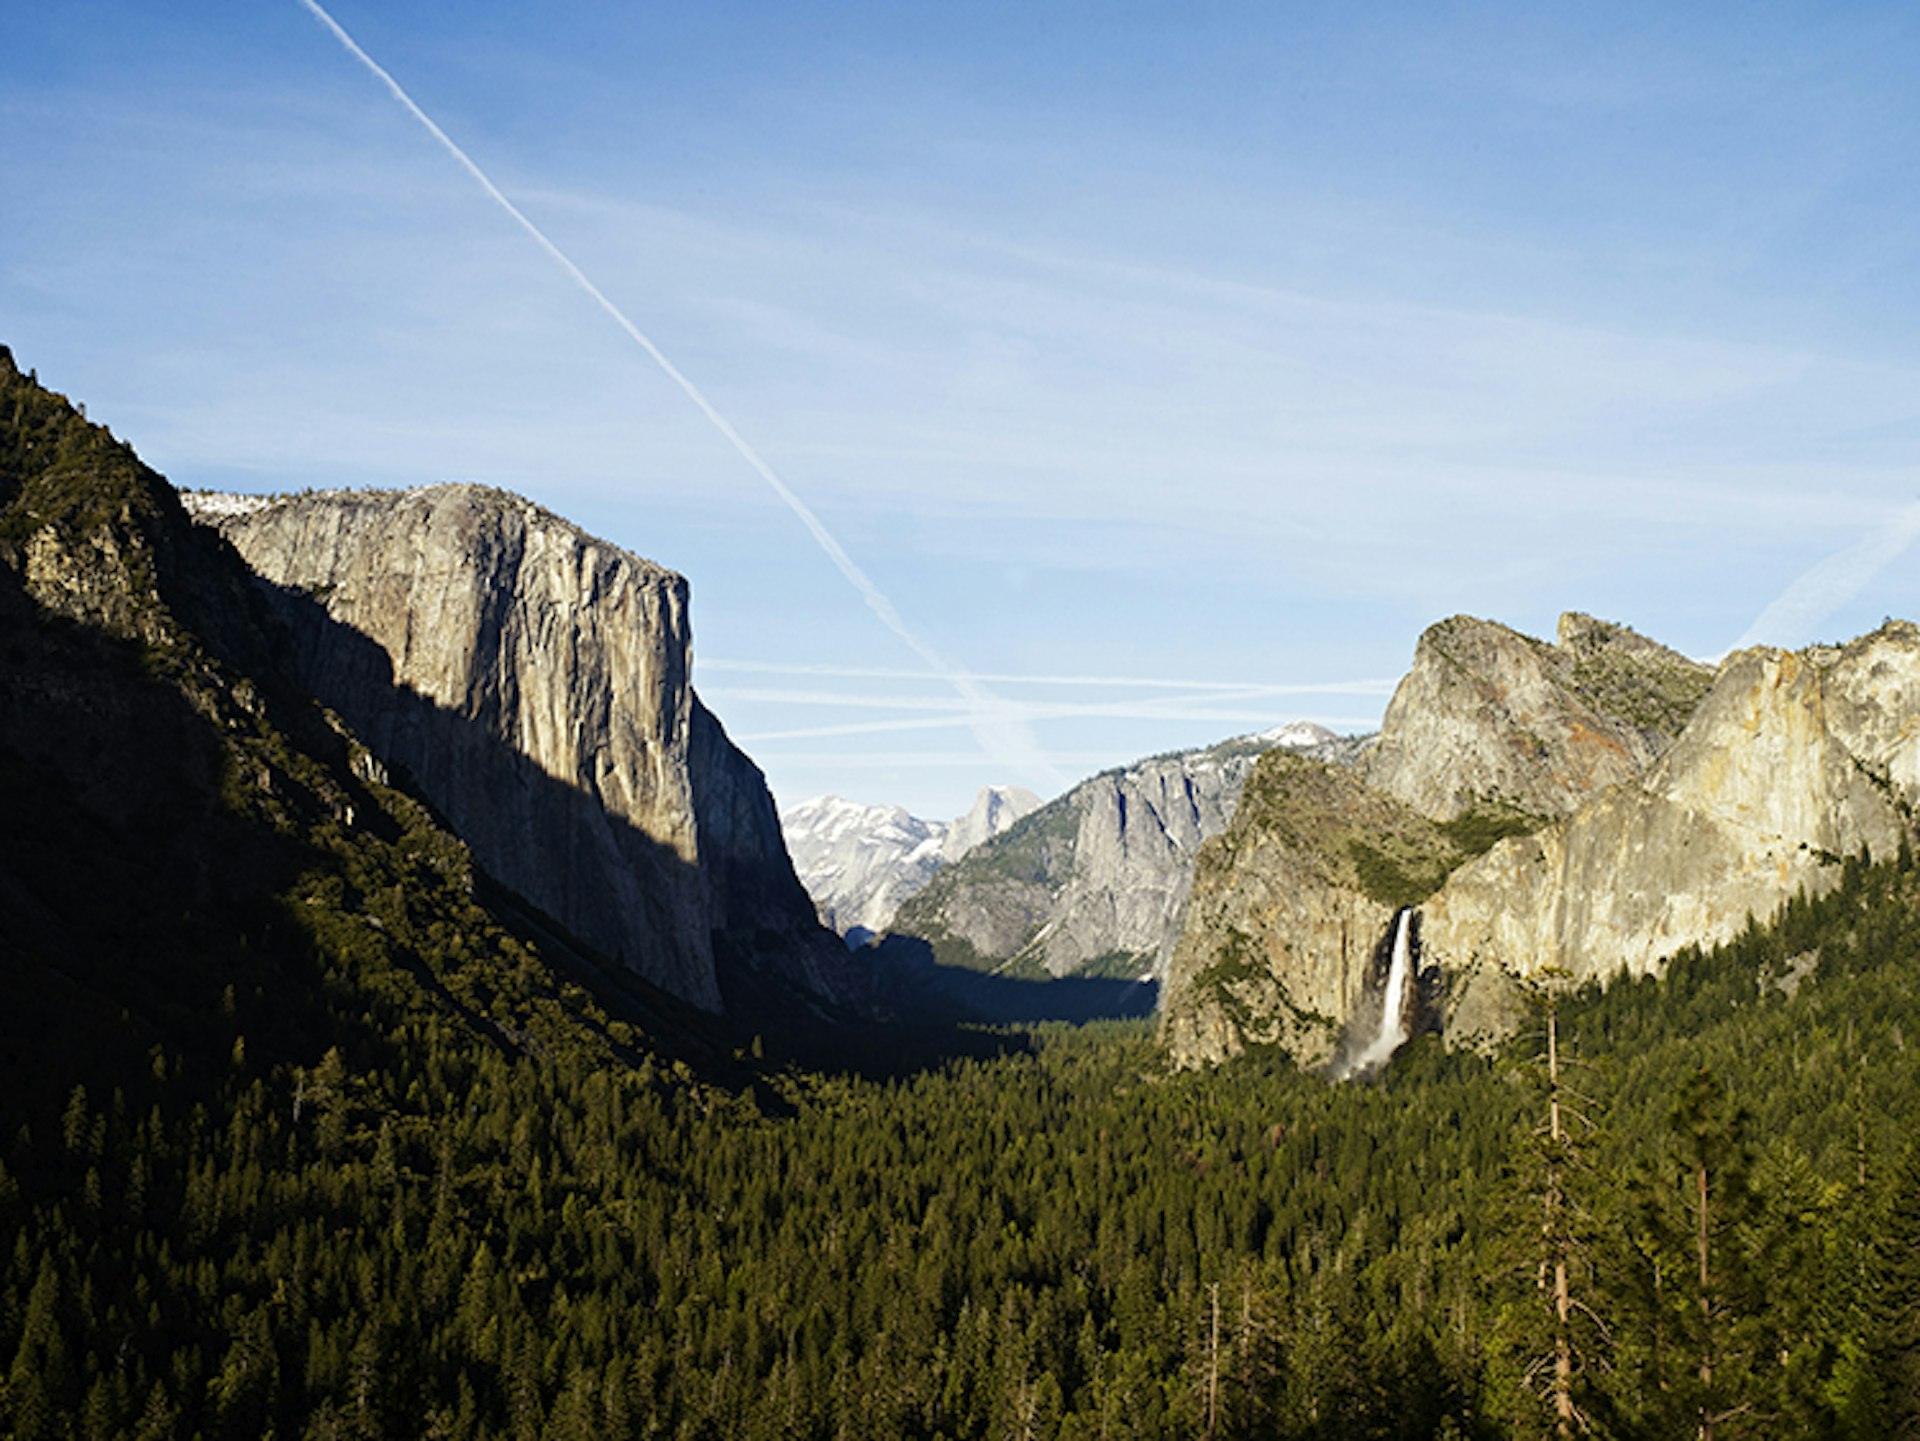 El Capitan (left) and pine forest in Yosemite Valley from Tunnel View